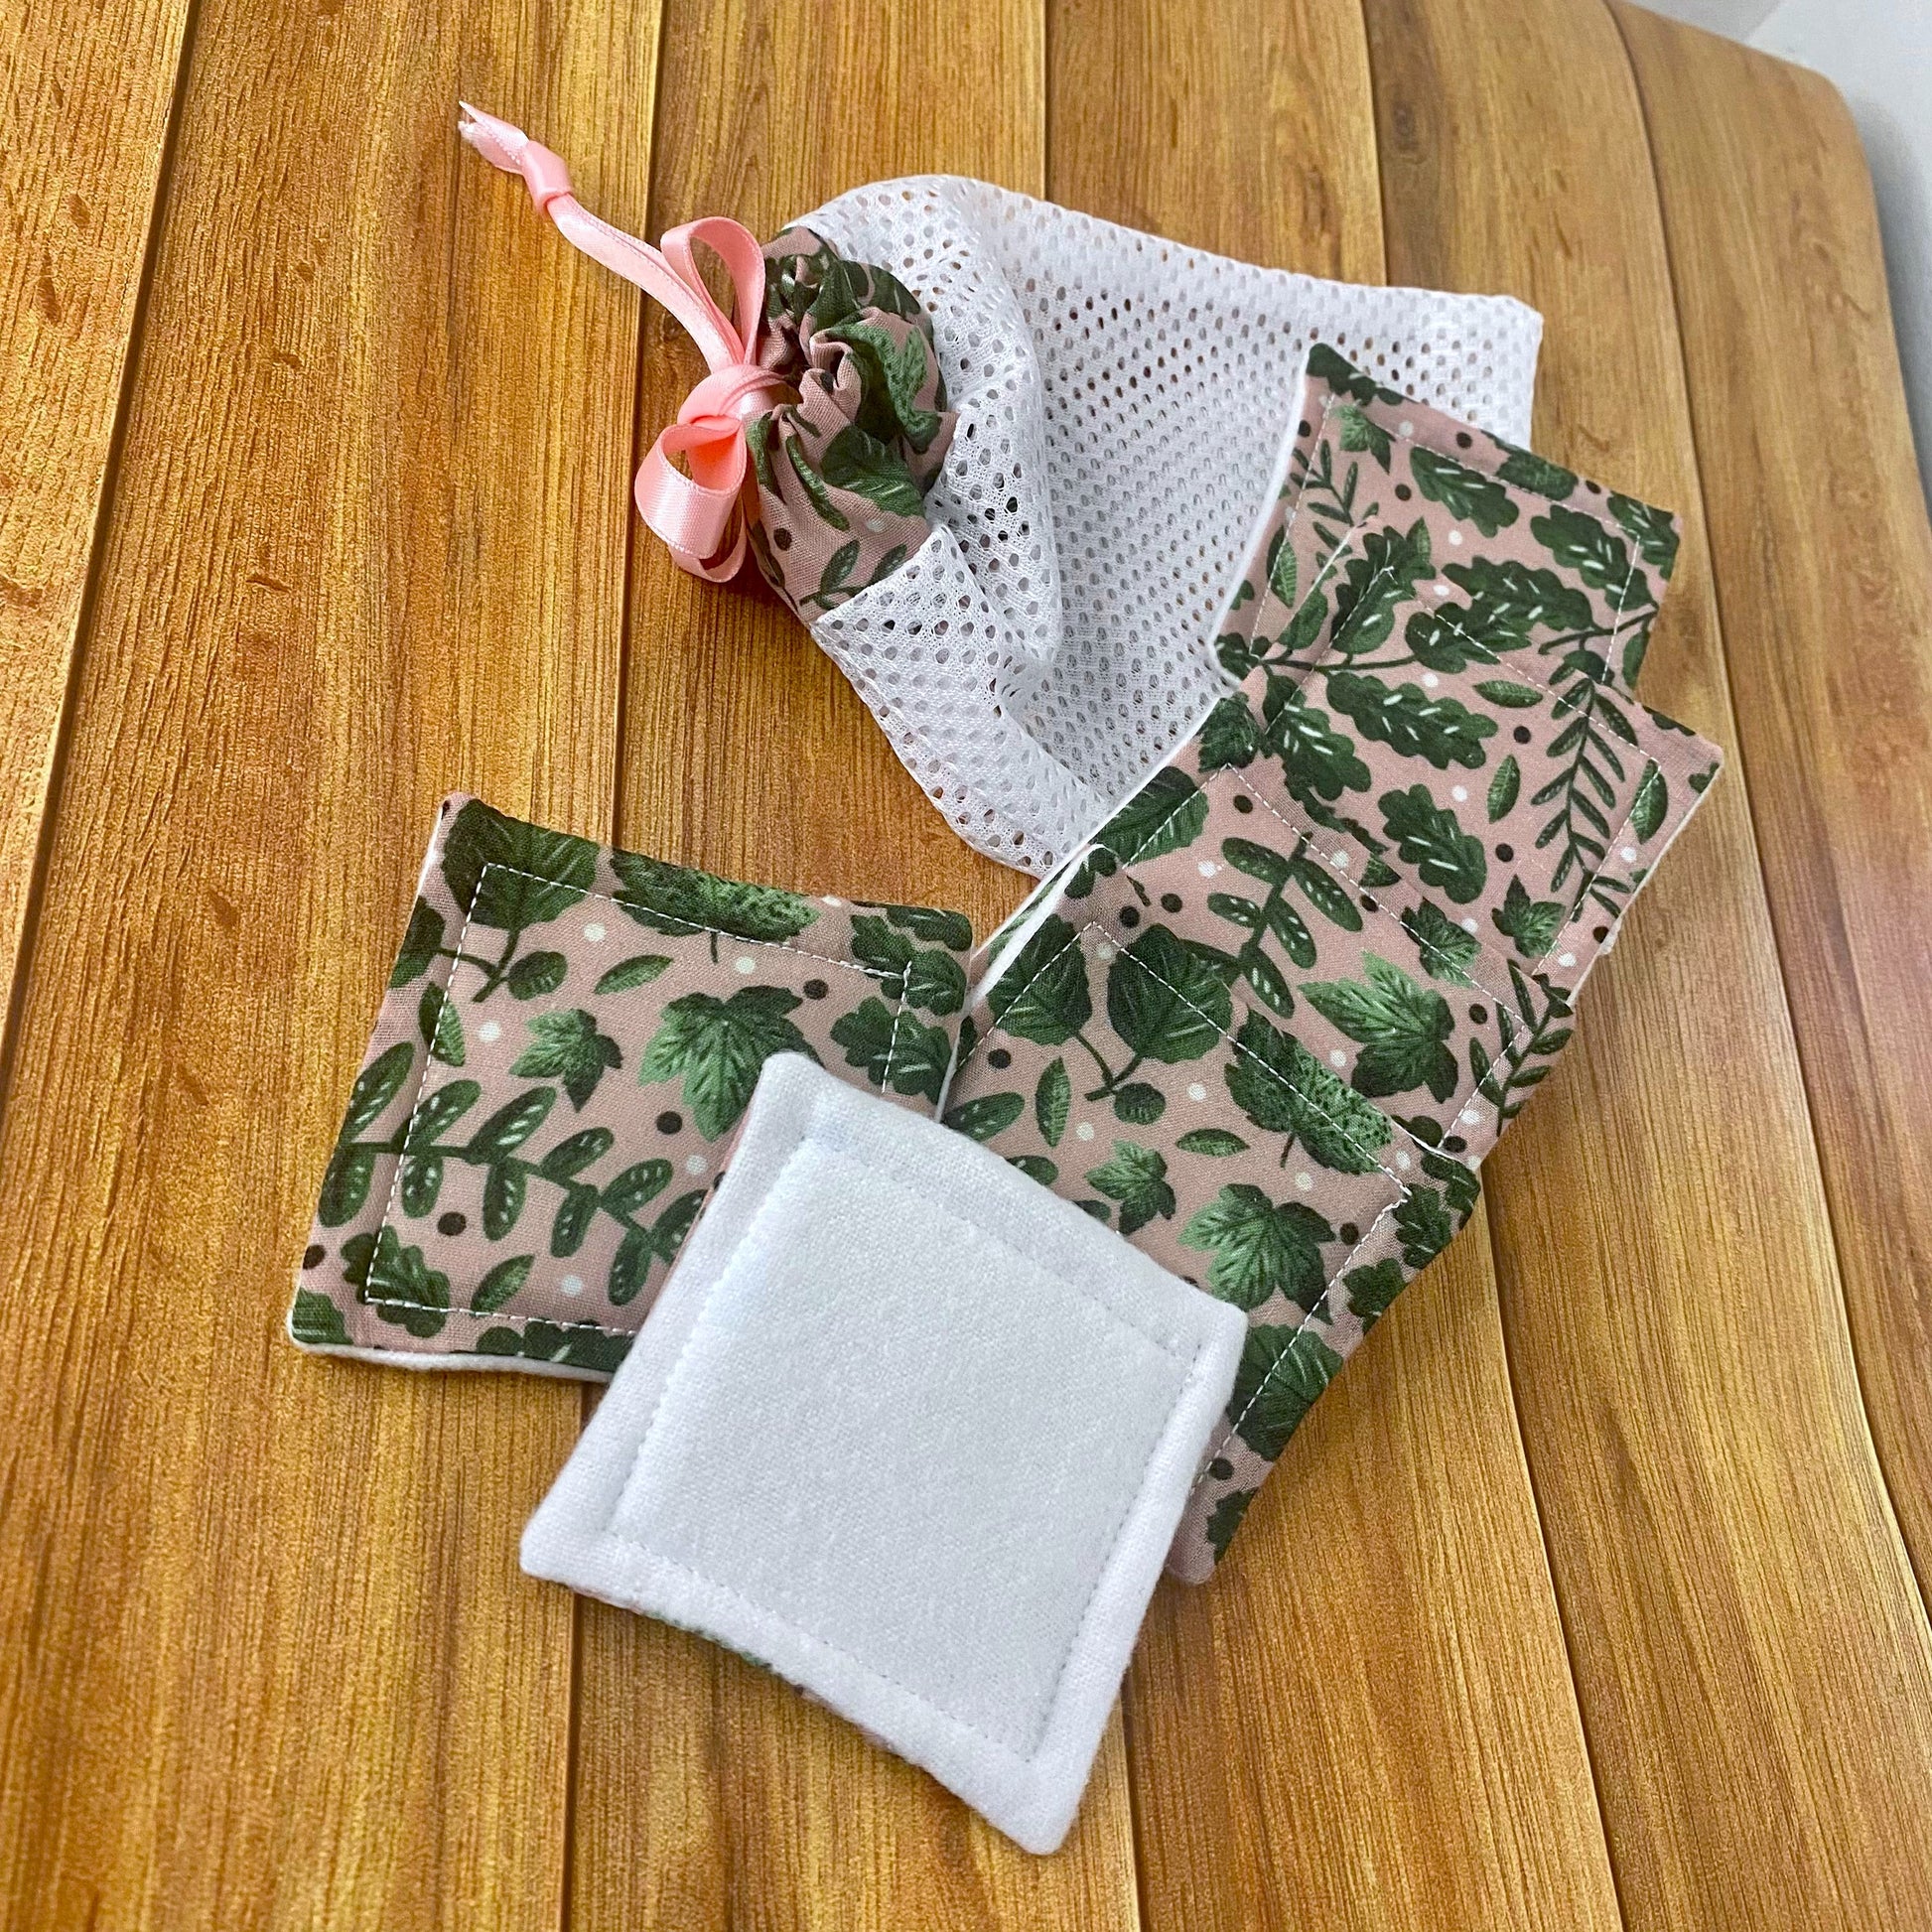 green foliage patterned reusable skincare pads and washbag on wooden surface